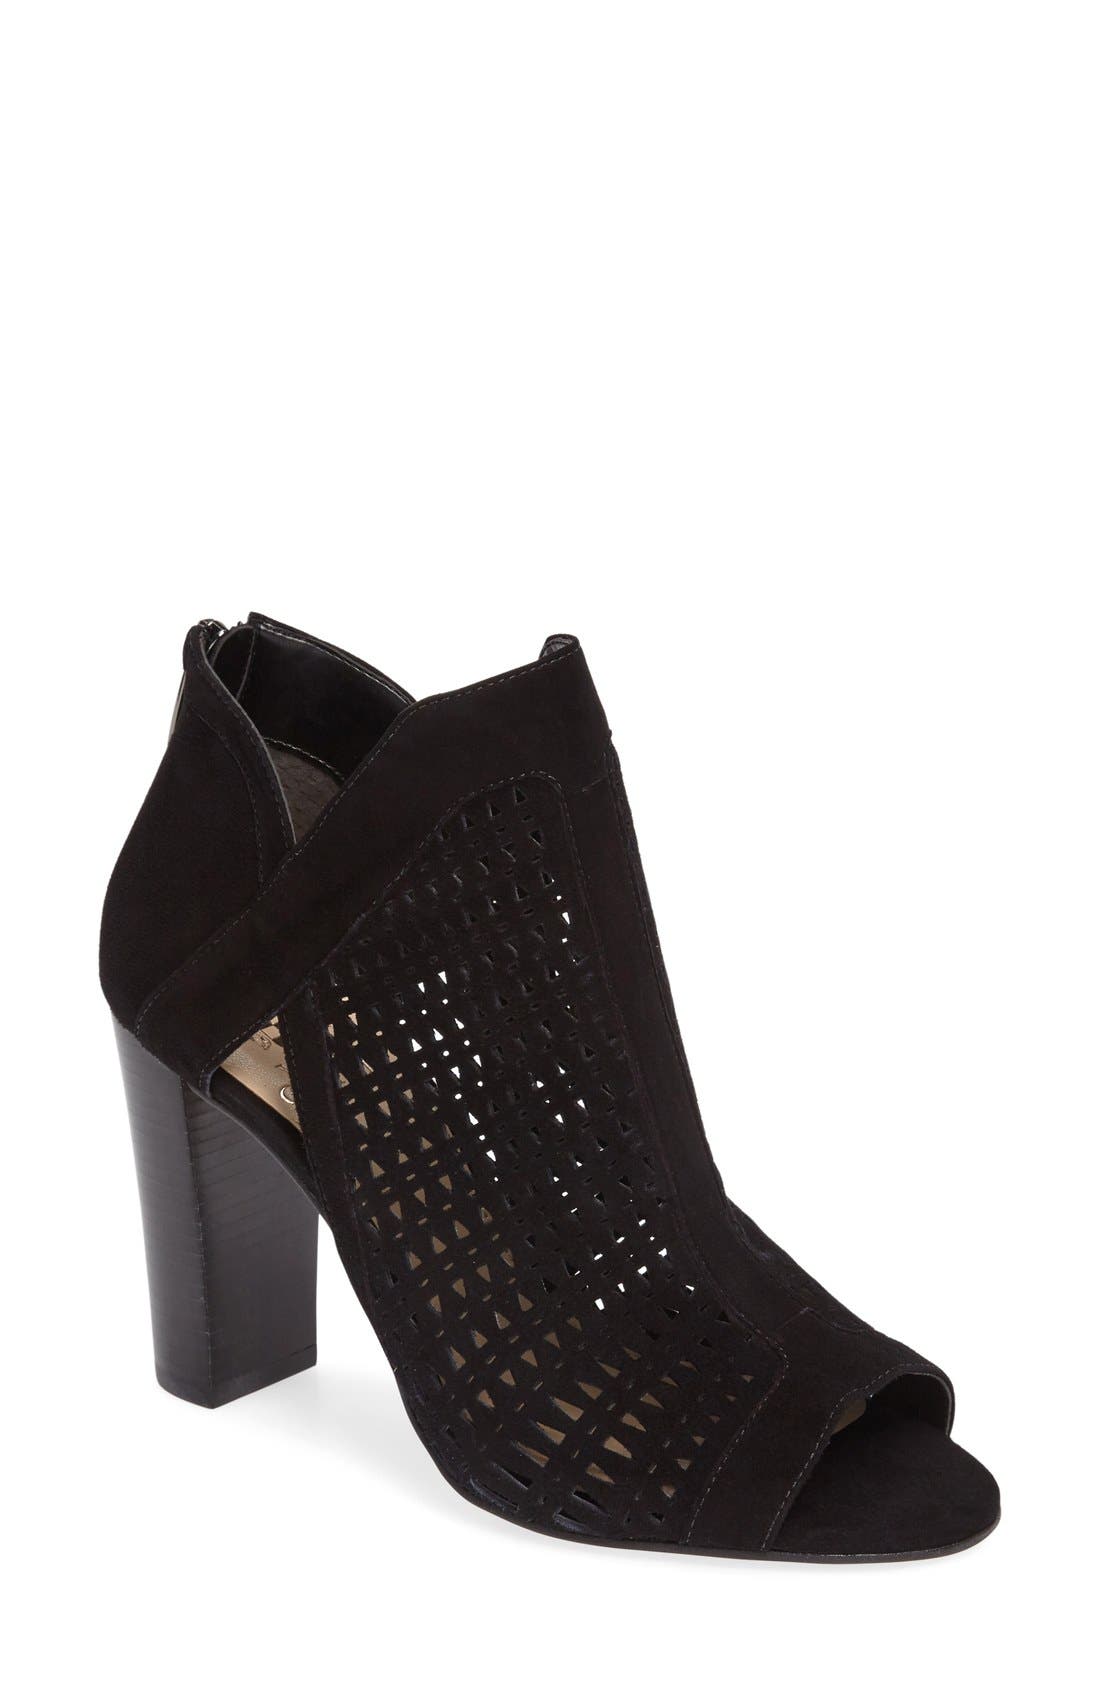 vince camuto shoes nordstrom rack